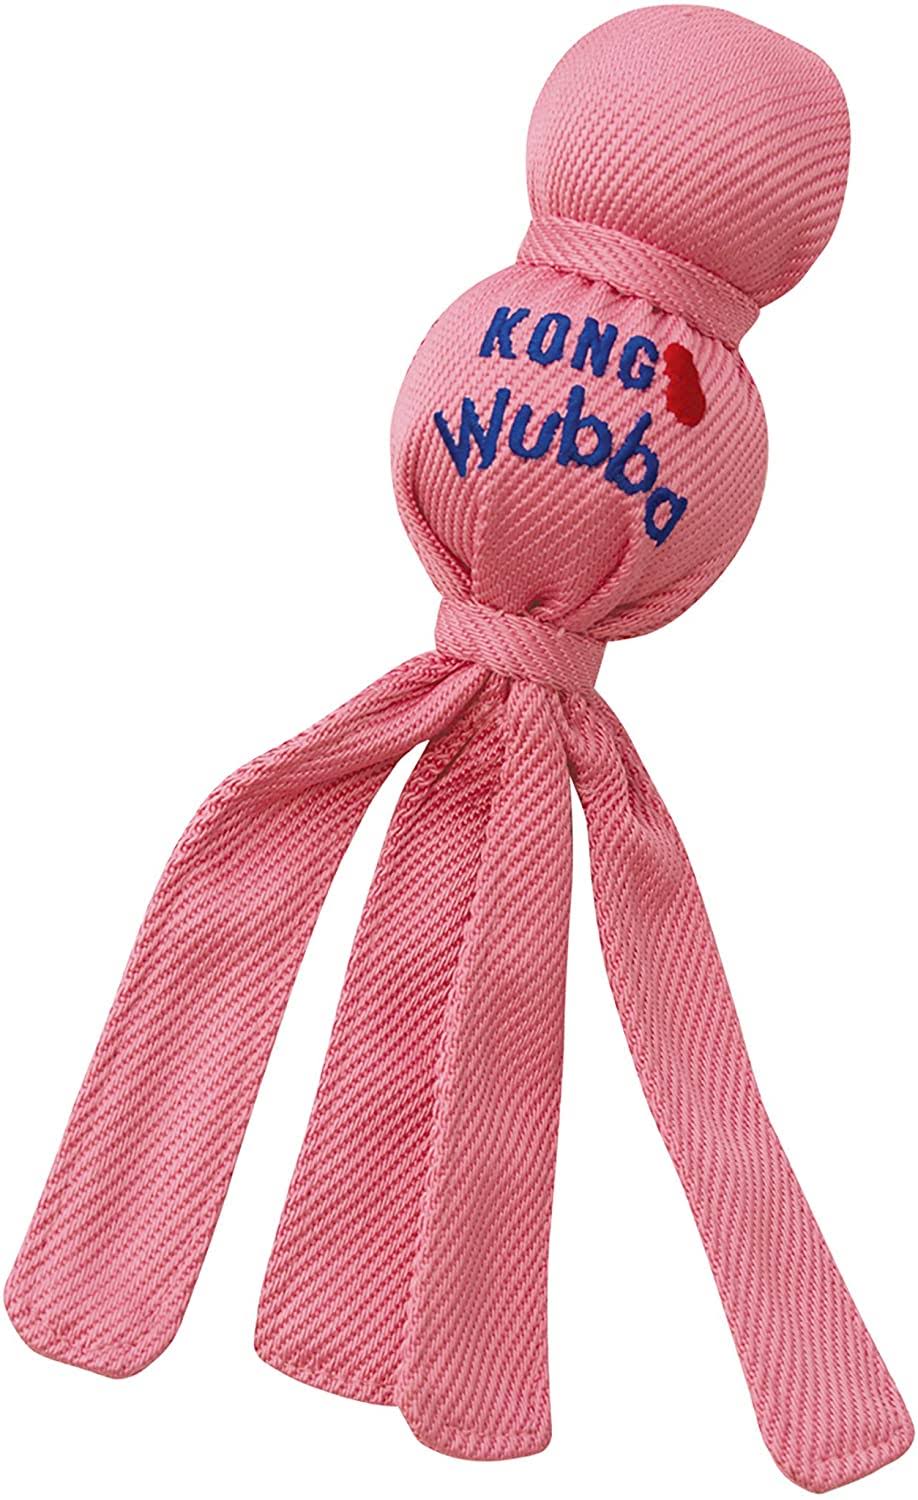 Kong Wubba Puppy Dog Toy - Assorted Colors